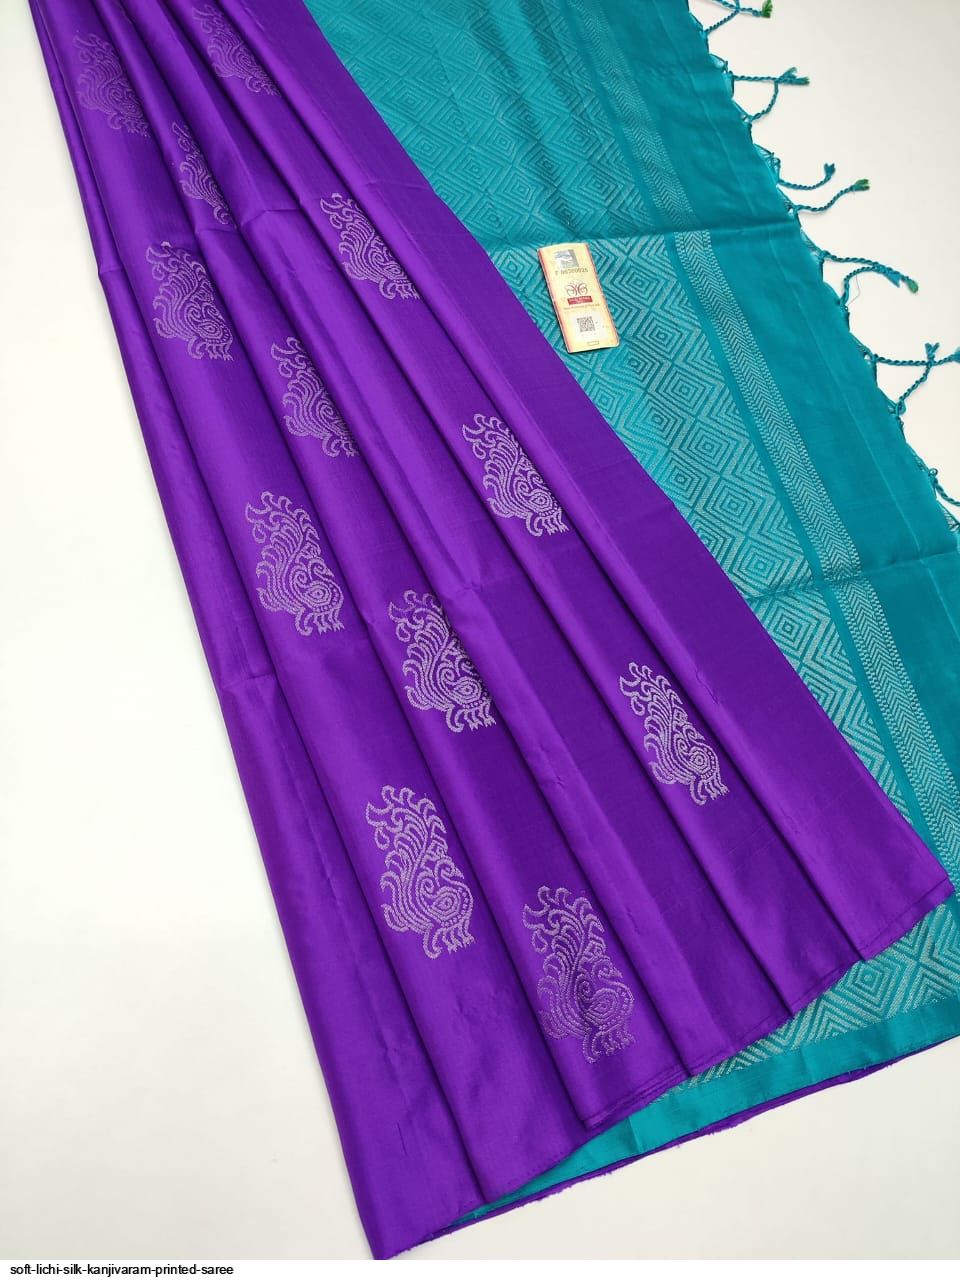 Borderless Sarees in Pure Silk or Blended Silk Options